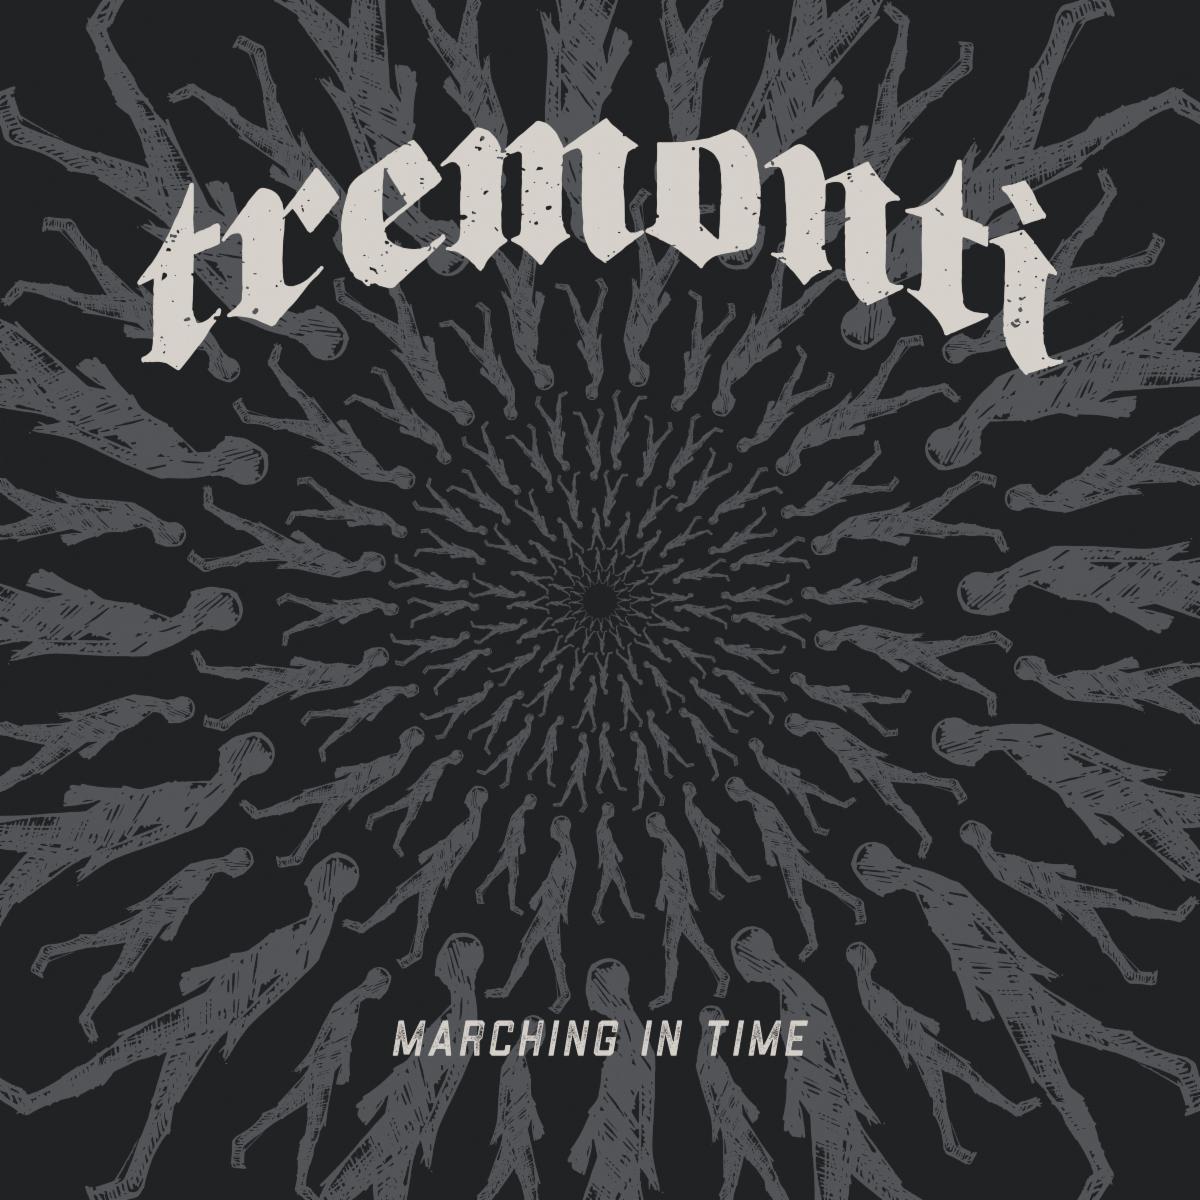 TREMONTI RELEASES MUSIC VIDEO FOR DEBUT SINGLE "IF NOT FOR YOU"